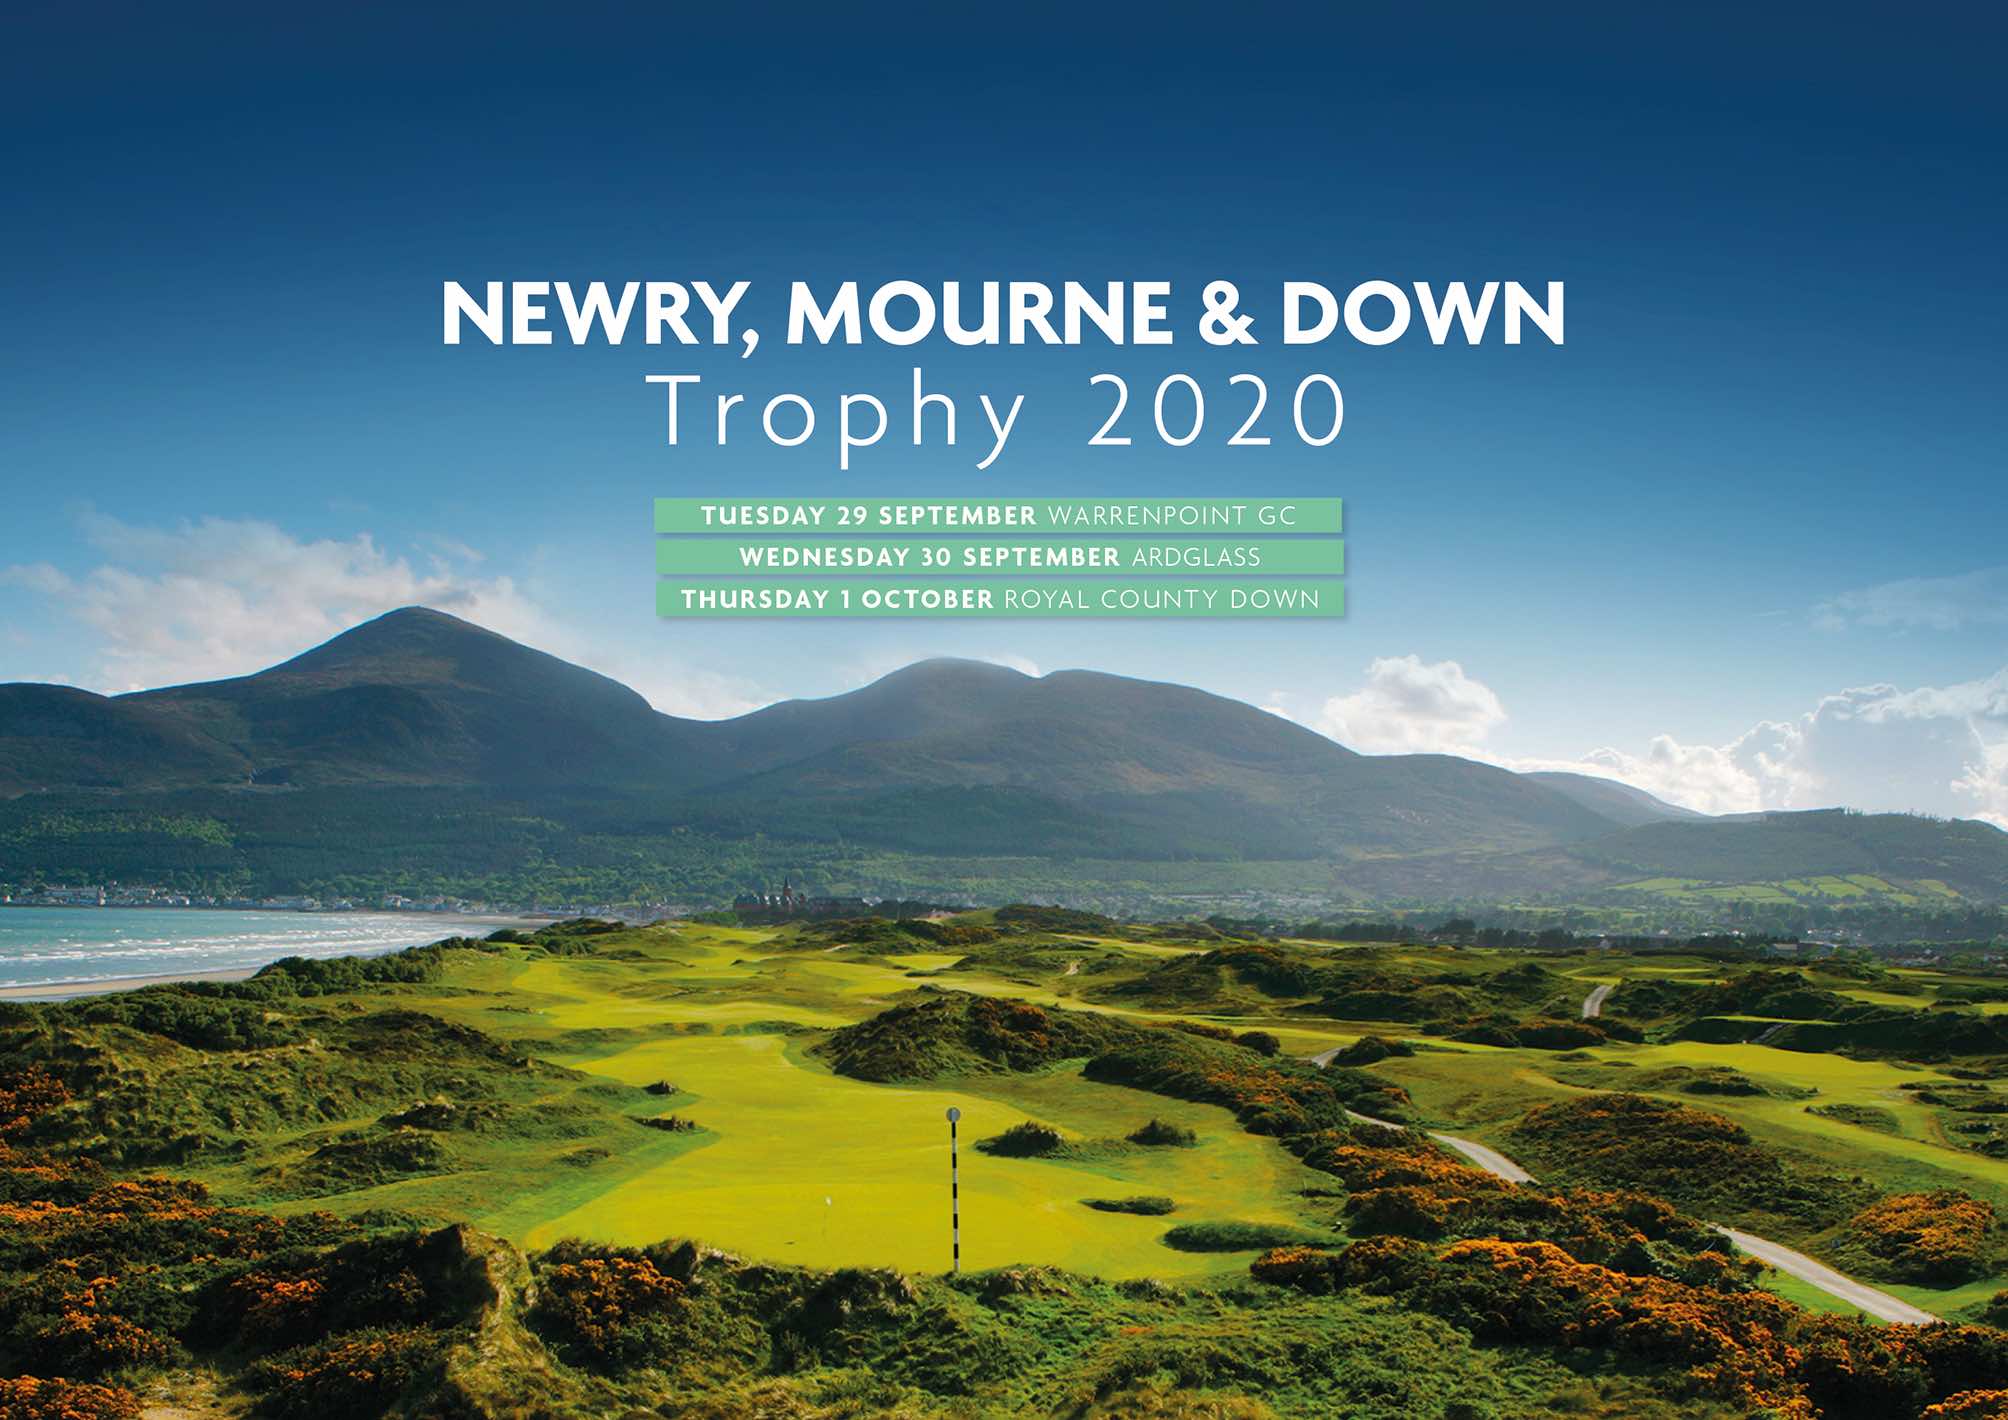 Late availability for the Newry, Mourne & Down Trophy 2020